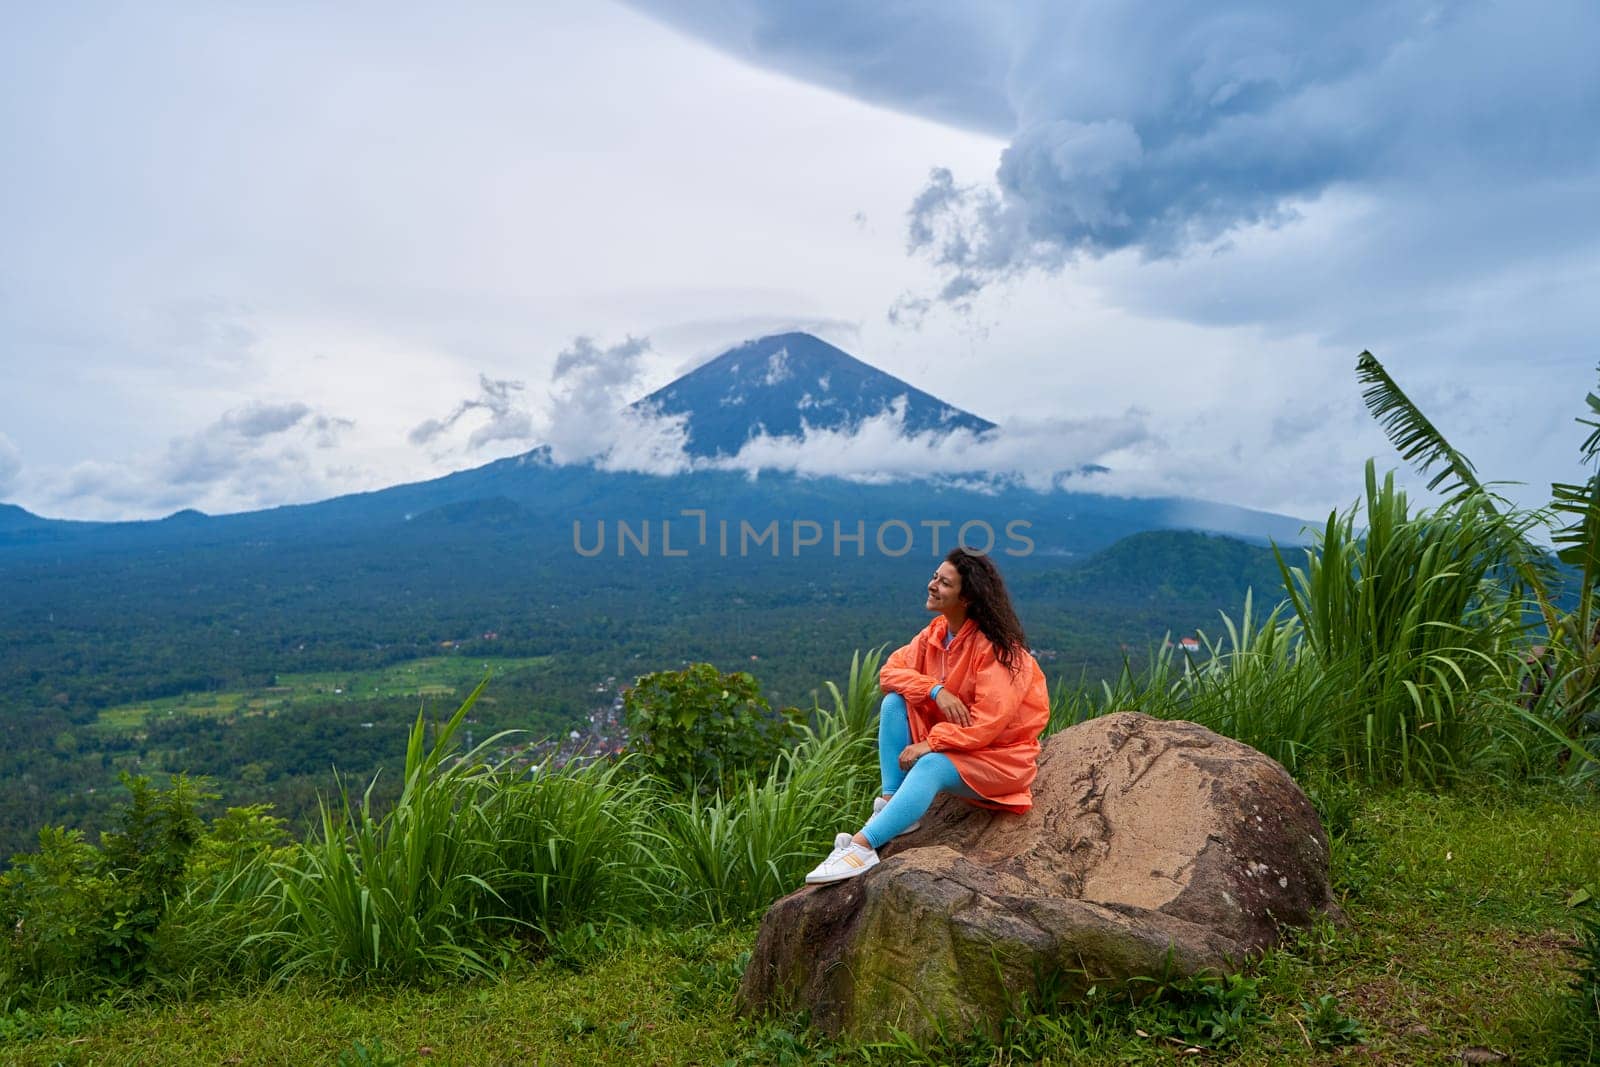 A young woman sits on a large rock in a viewpoint and enjoys the view of the sacred Mount Agung volcano hidden by clouds on a rainy day on the island of Bali.